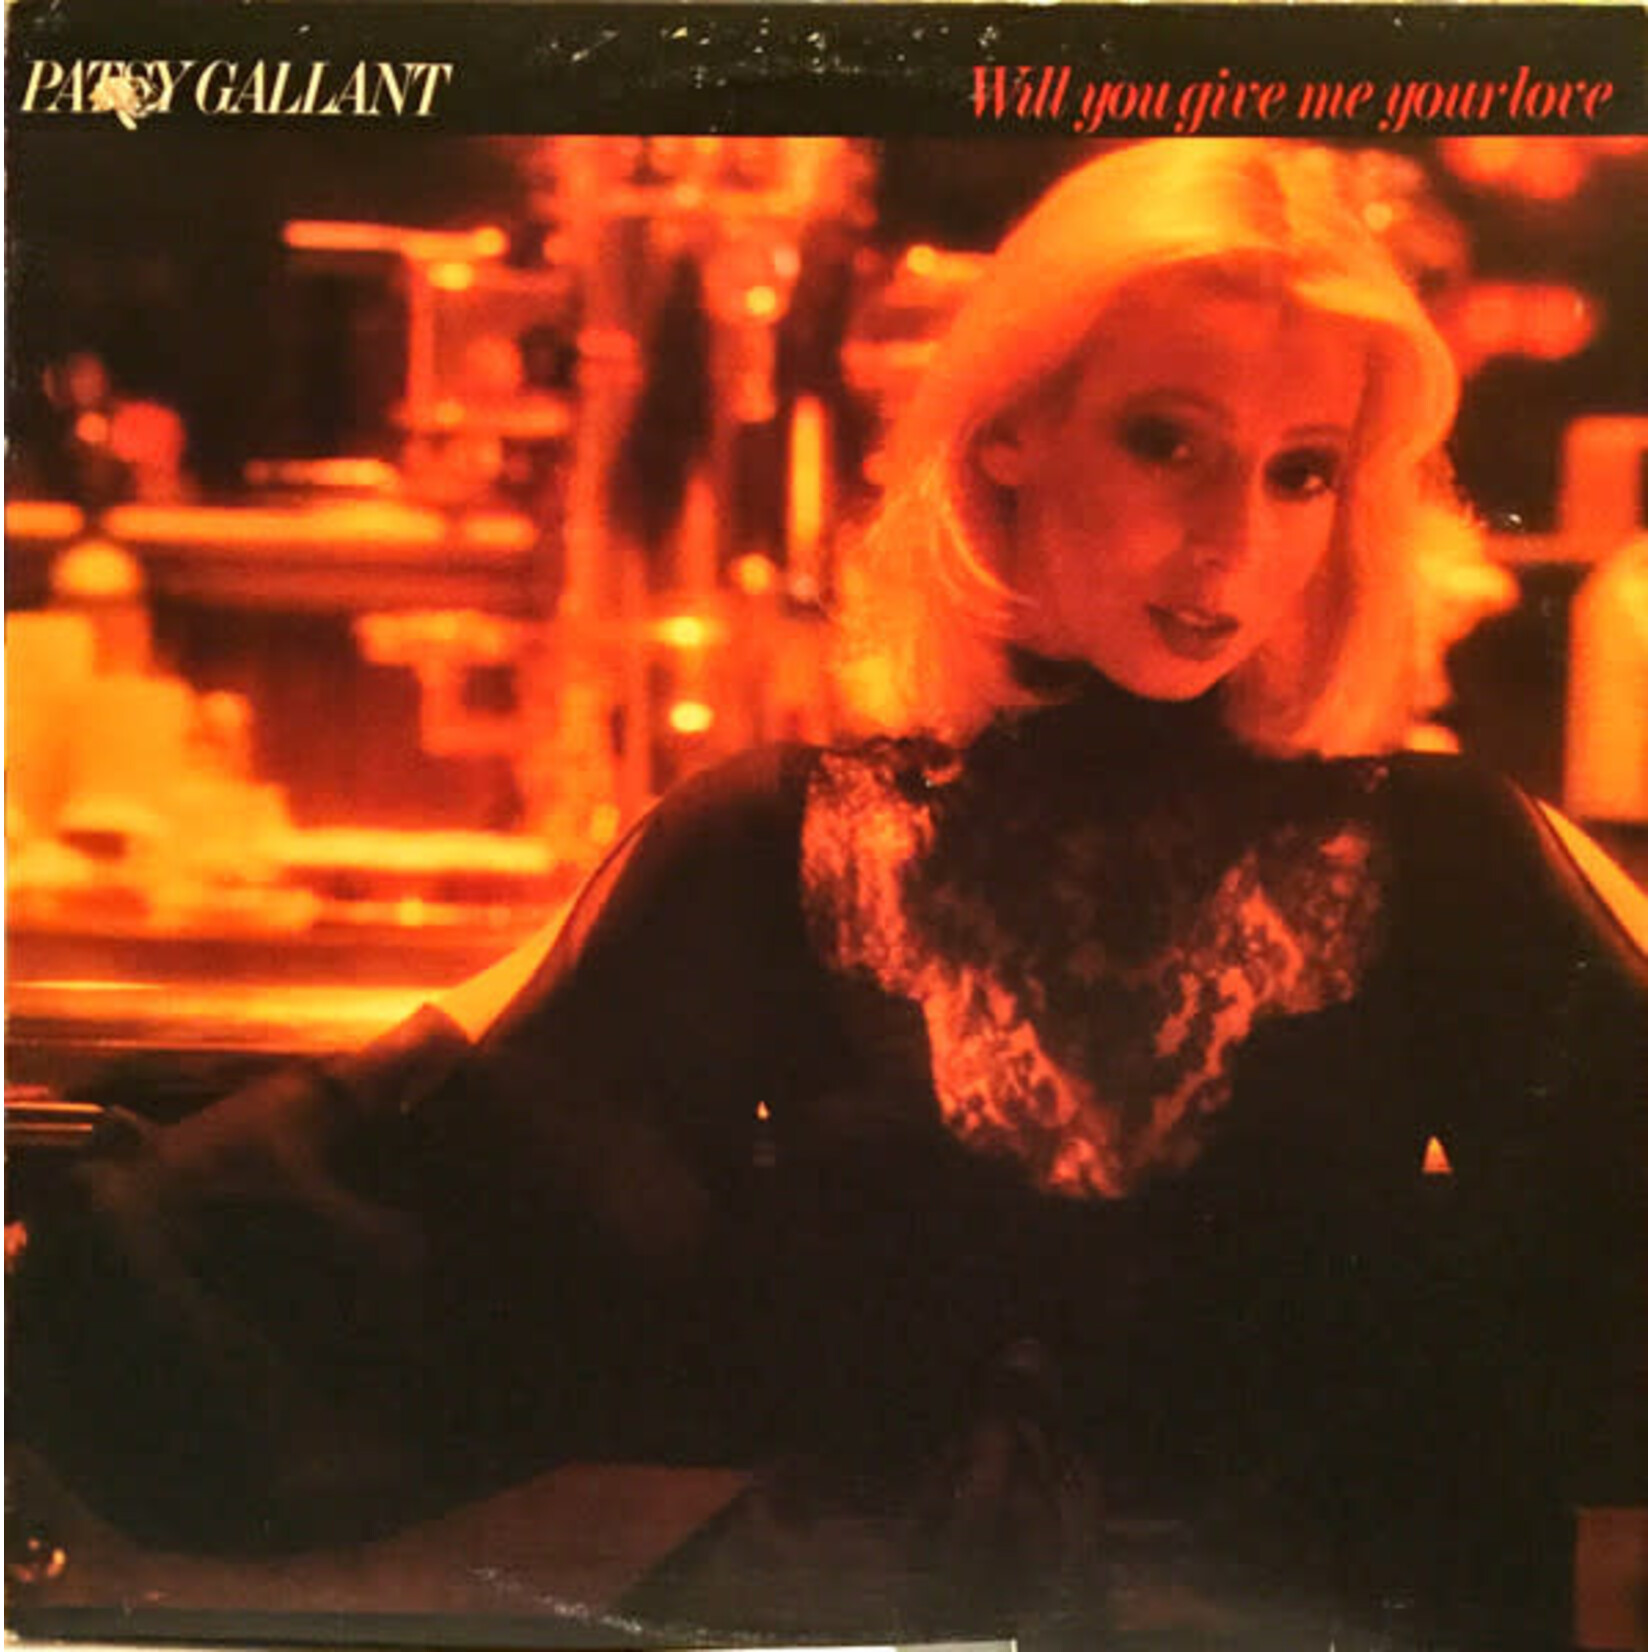 [Vintage] Patsy Gallant - Will You Give Me Your Love